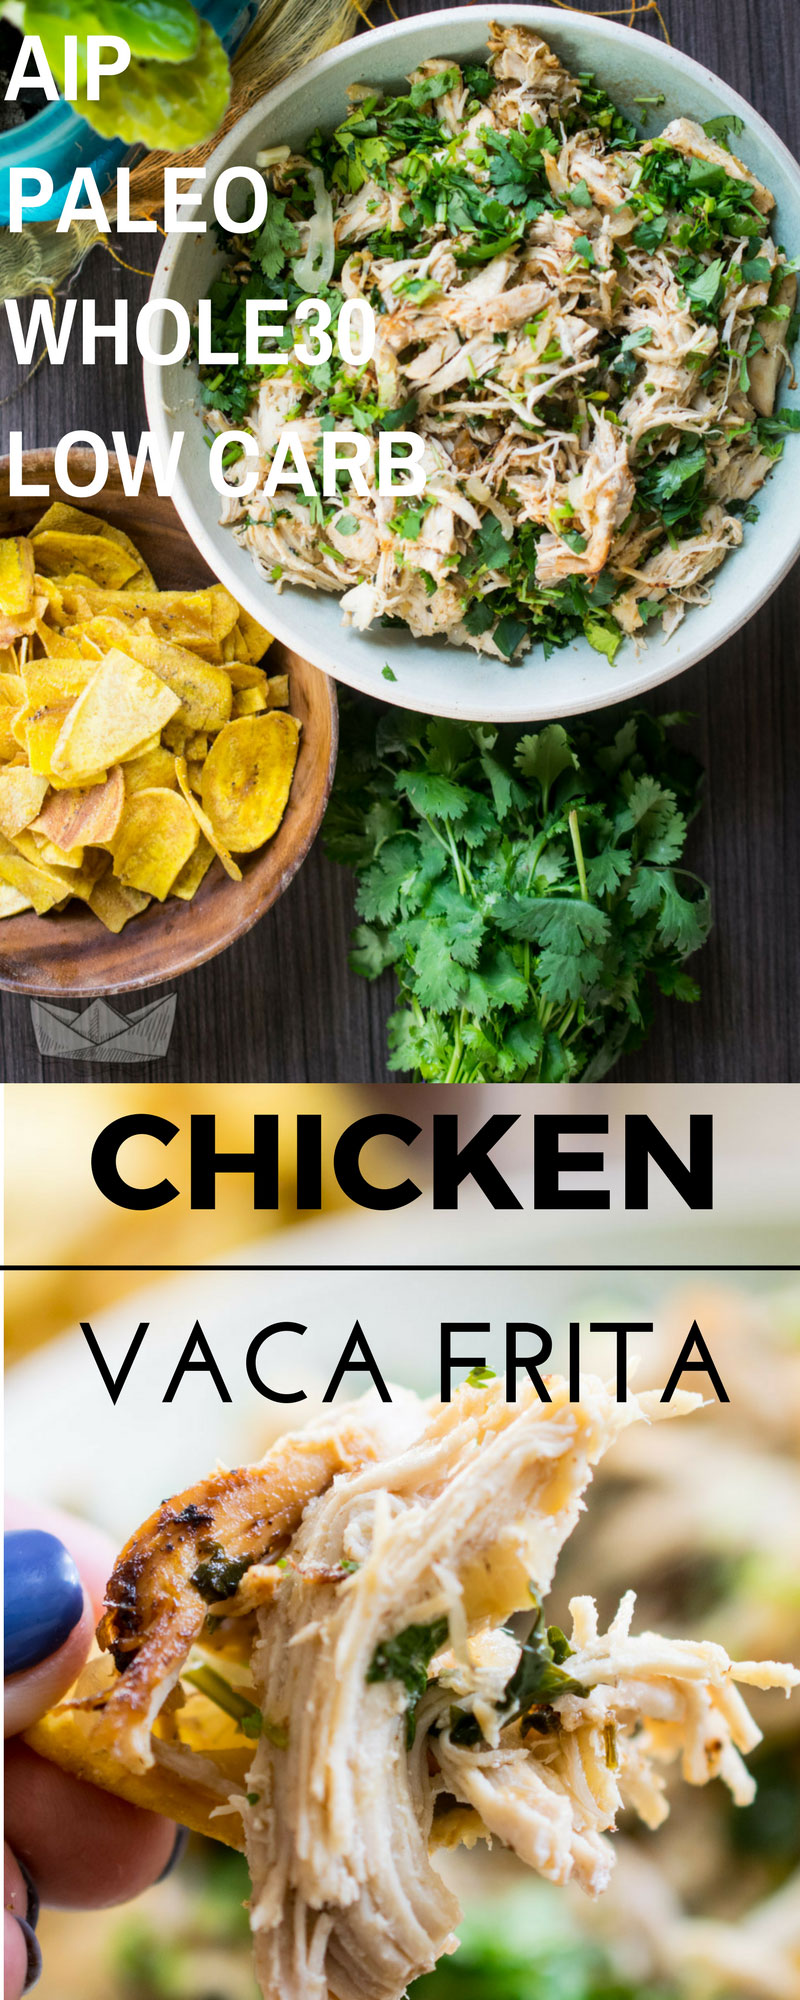 Instant Pot Chicken or Turkey Vaca Frita (Paleo, AIP, Whole30, Low-Carb) // TheCuriousCoconut.com guest post by TheCastawayKitchen.com